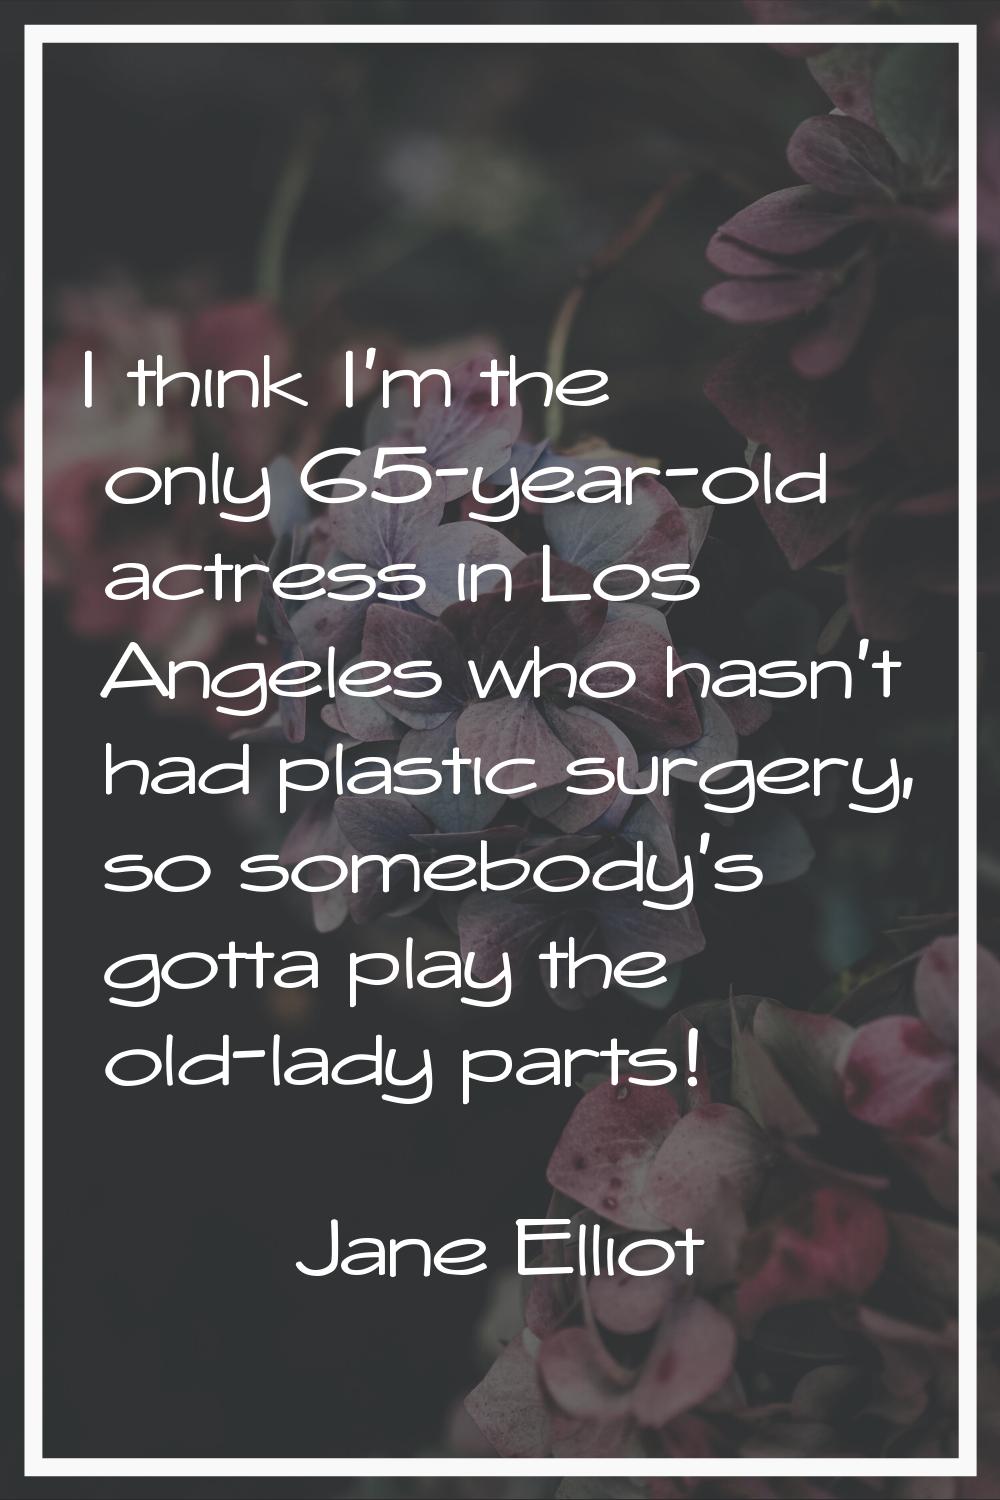 I think I'm the only 65-year-old actress in Los Angeles who hasn't had plastic surgery, so somebody